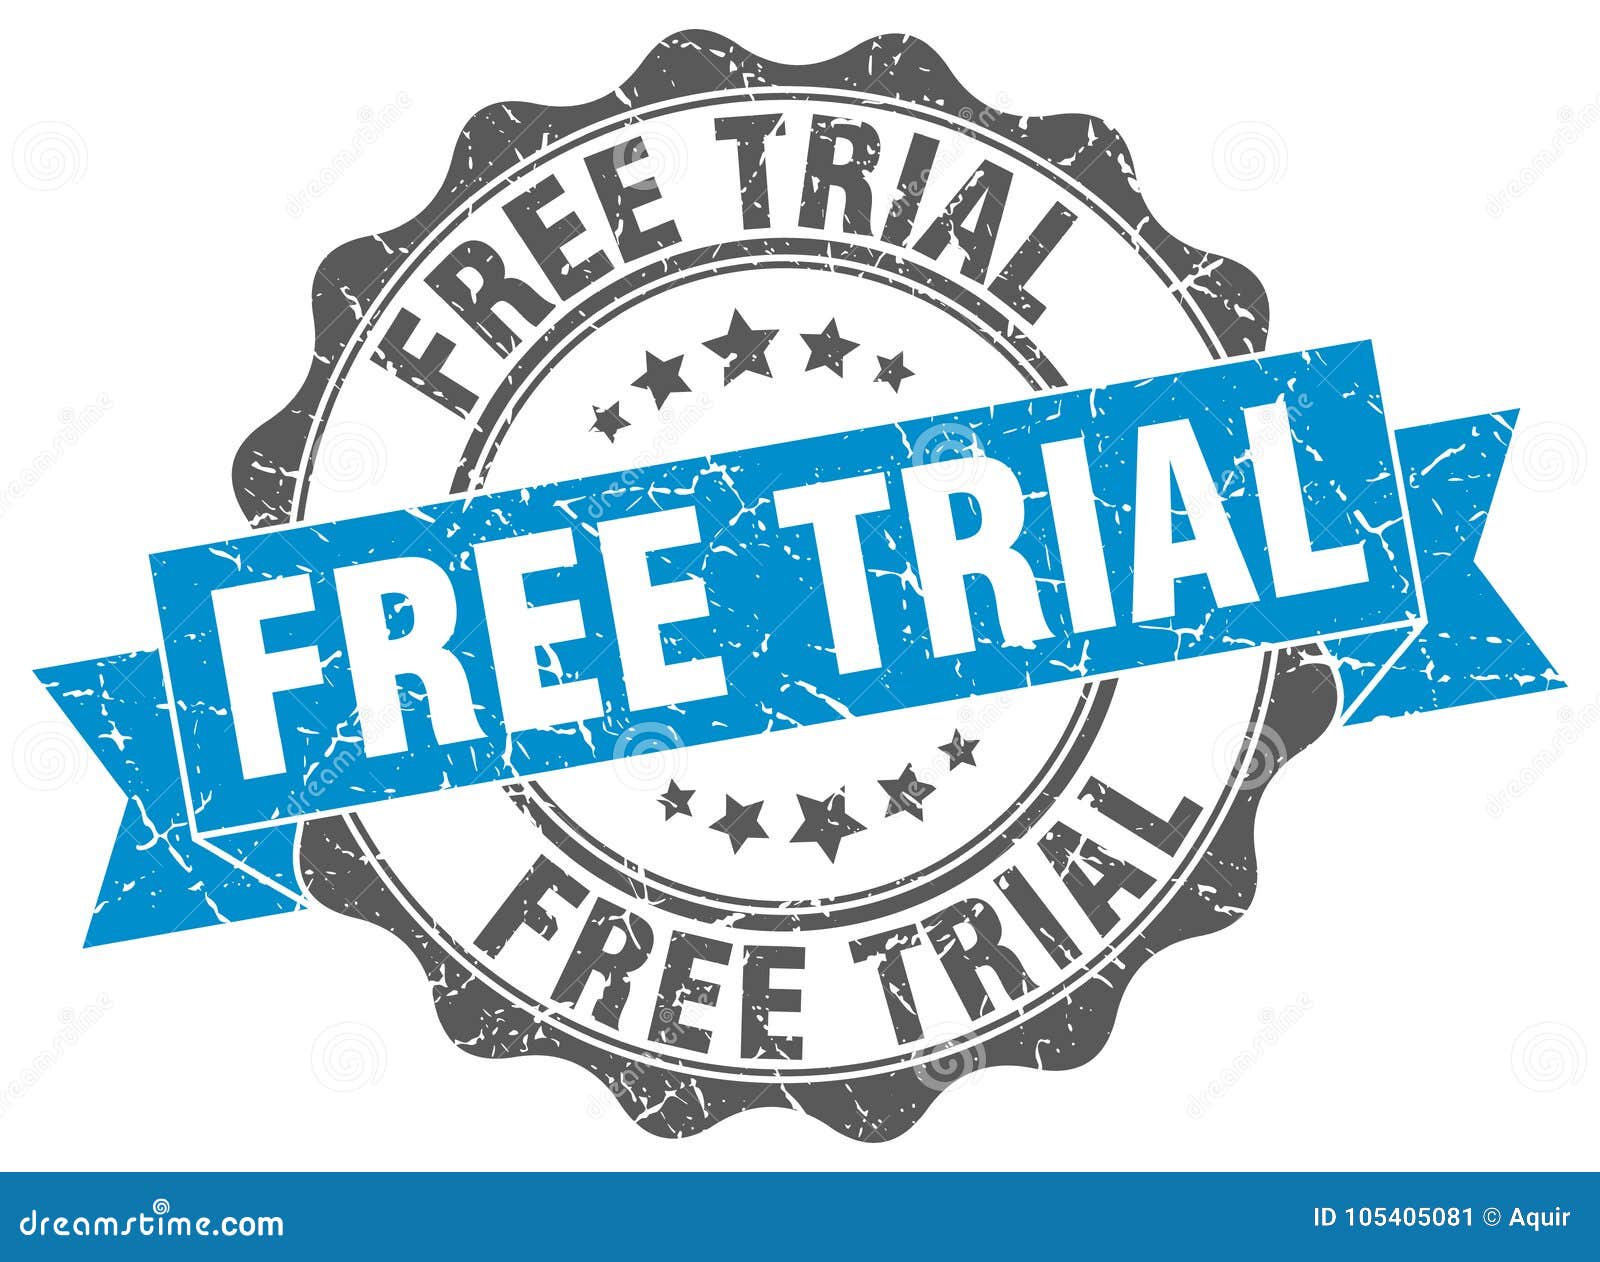 free trial stamp